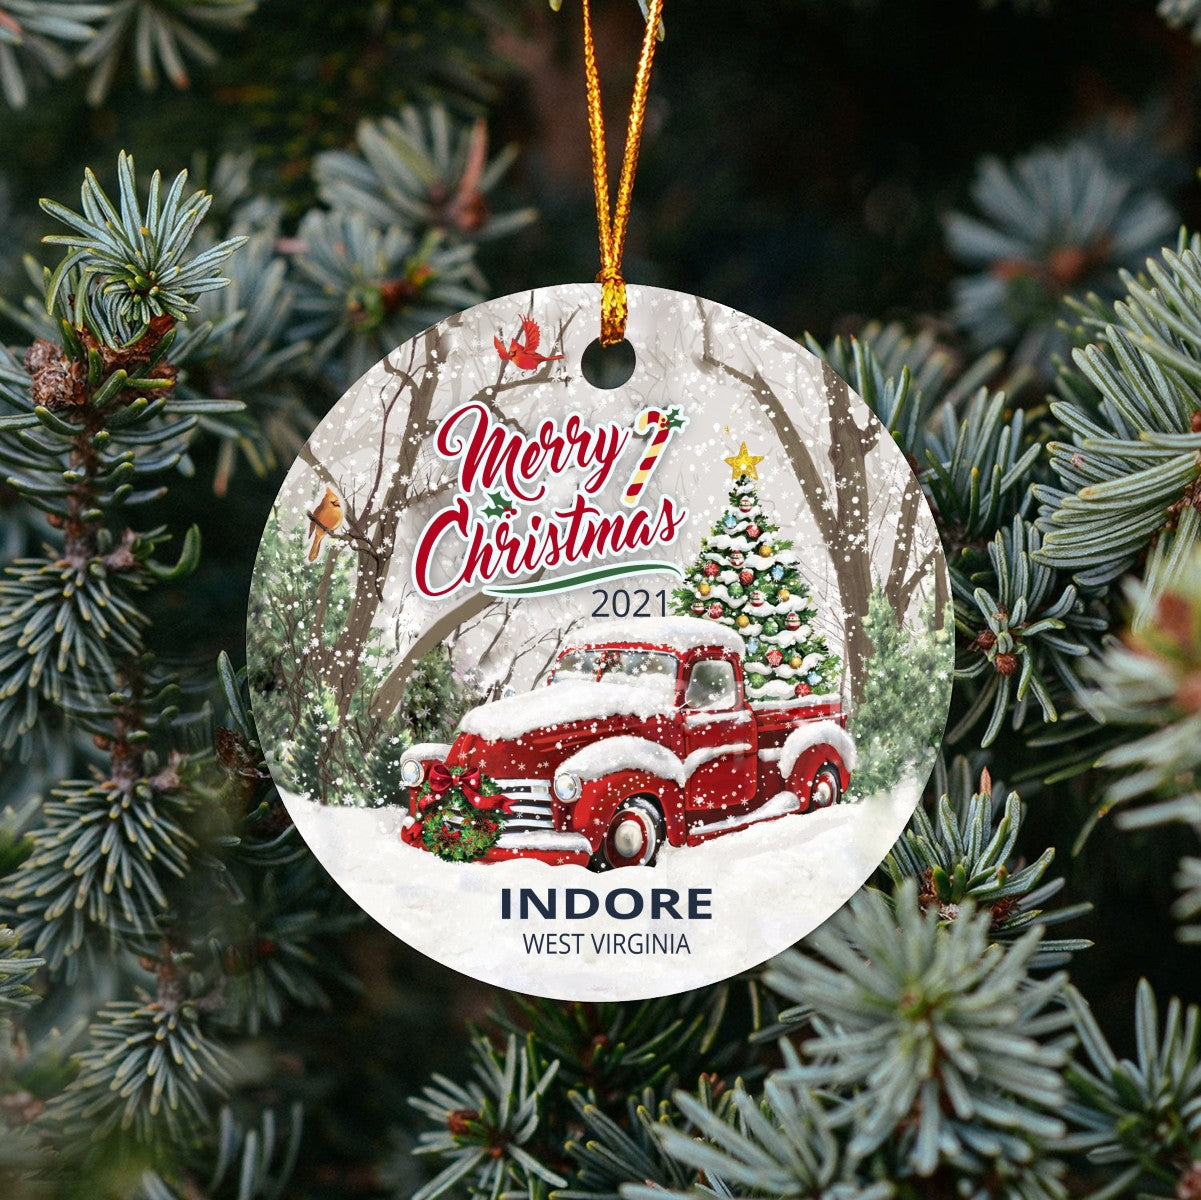 Christmas Tree Ornaments Indore - Ornament With Name City, State Indore West Virginia WV Ornament - Red Truck Xmas Ornaments 3'' Plastic Gift For Family, Friend And Housewarming